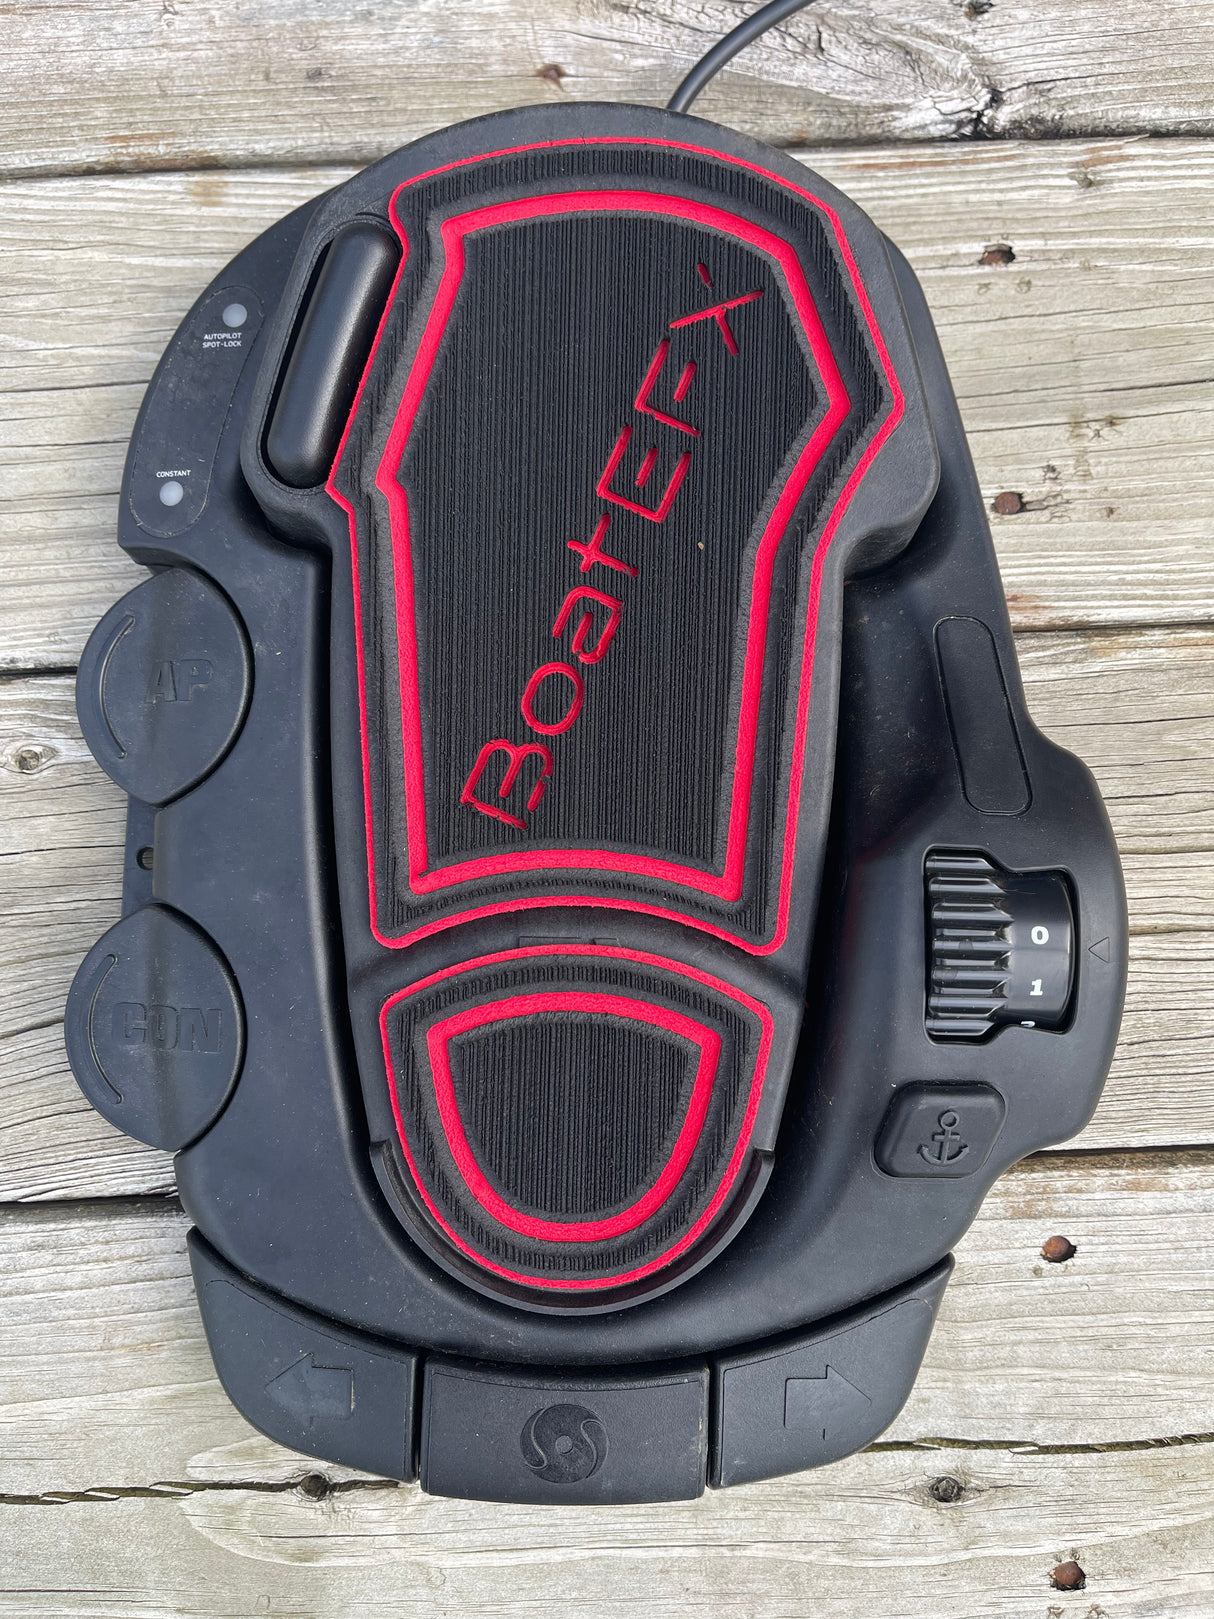 Trolling Motor Pedal Pad for the Ultrex and Ultrex Quest